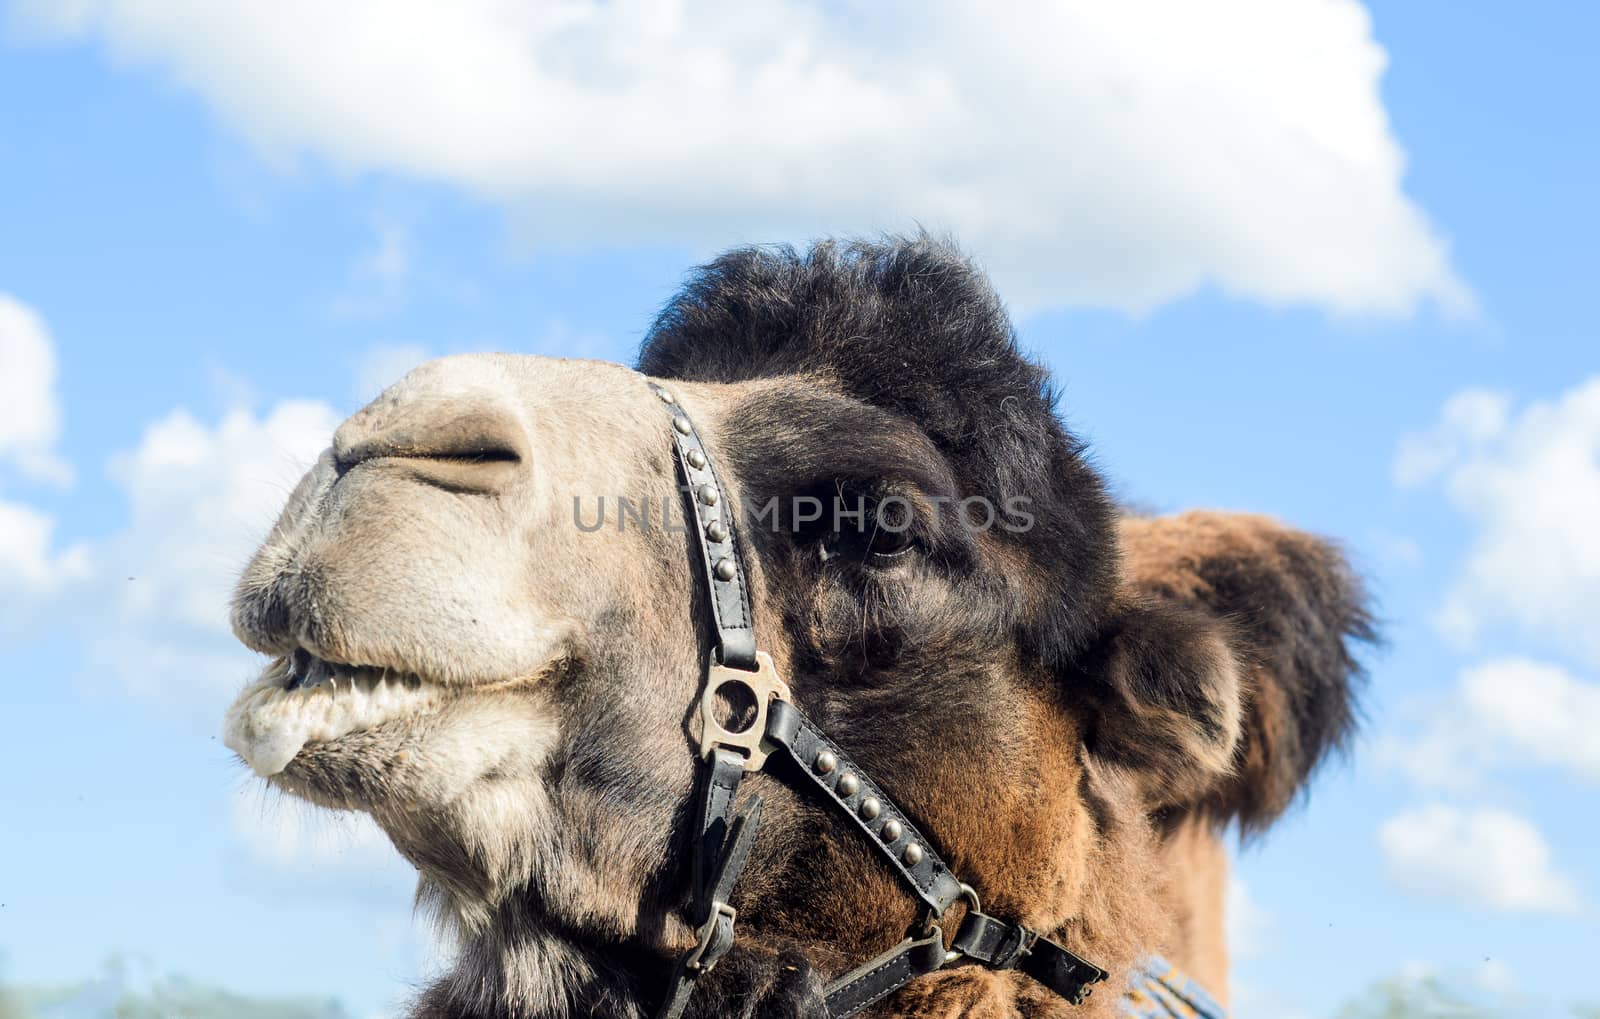 Profile view of the camel's head on a blue sky background